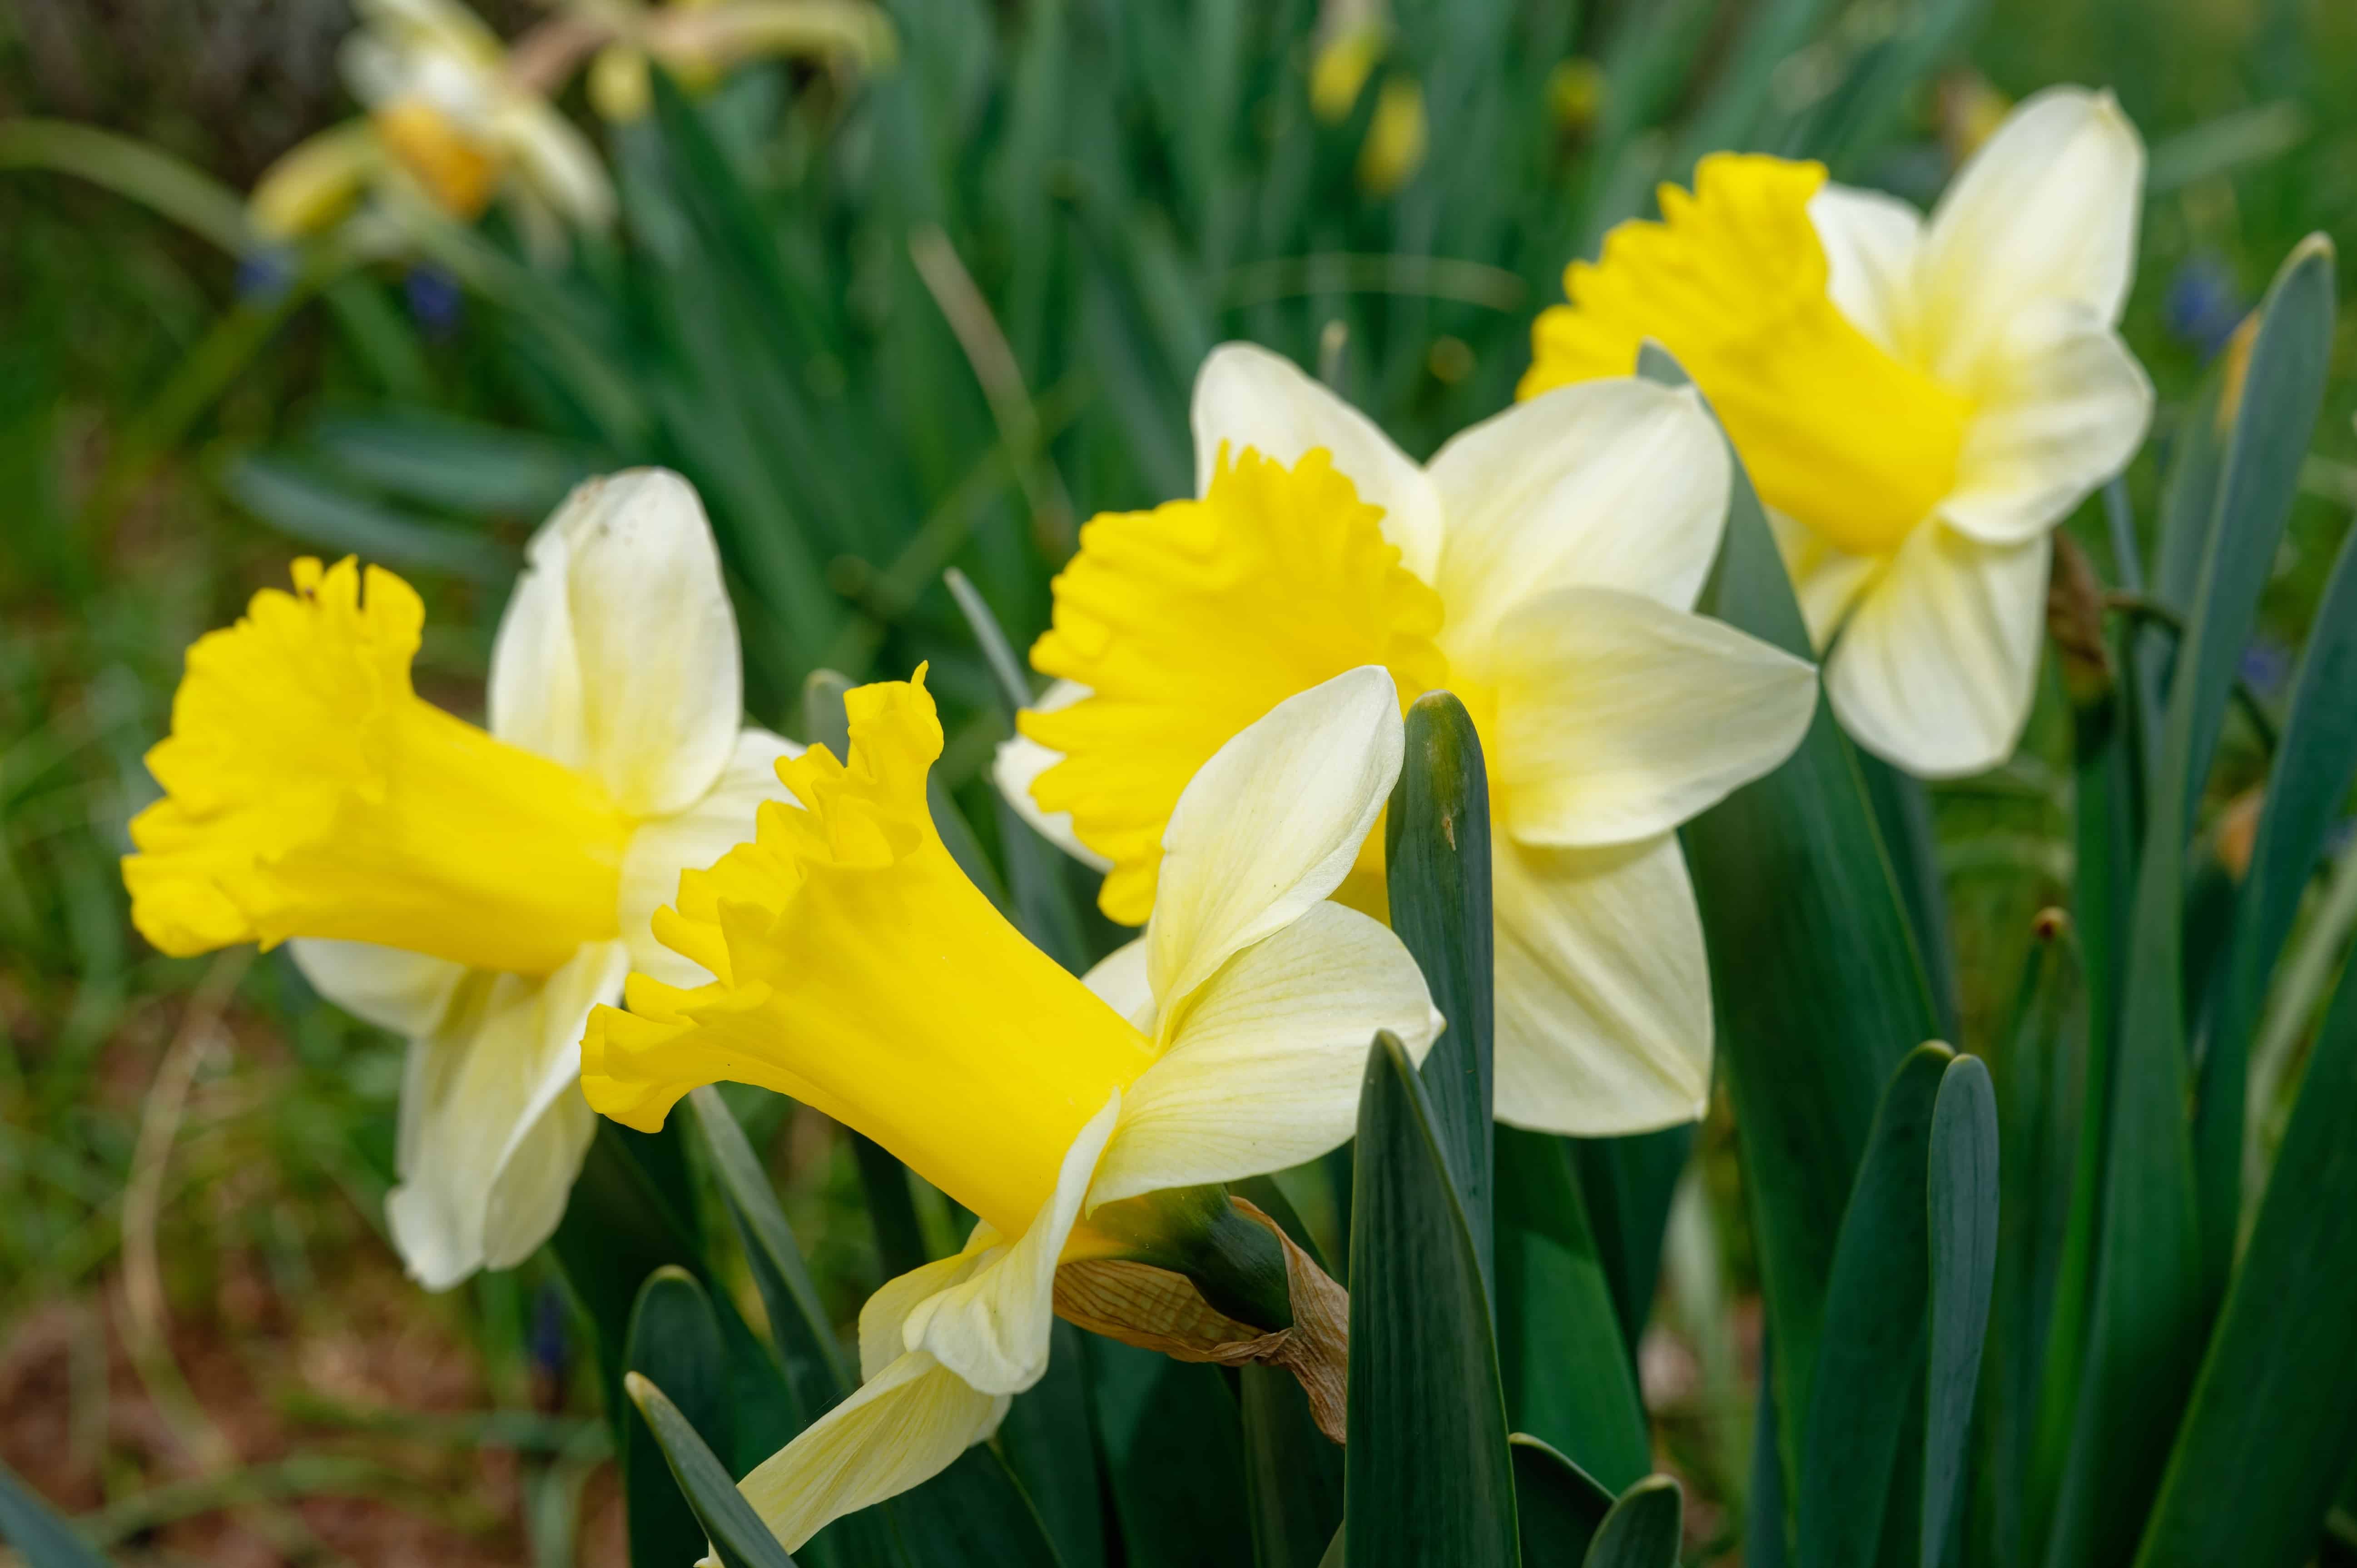 The 5 Most Popular Types Of Daffodils - AZ Animals